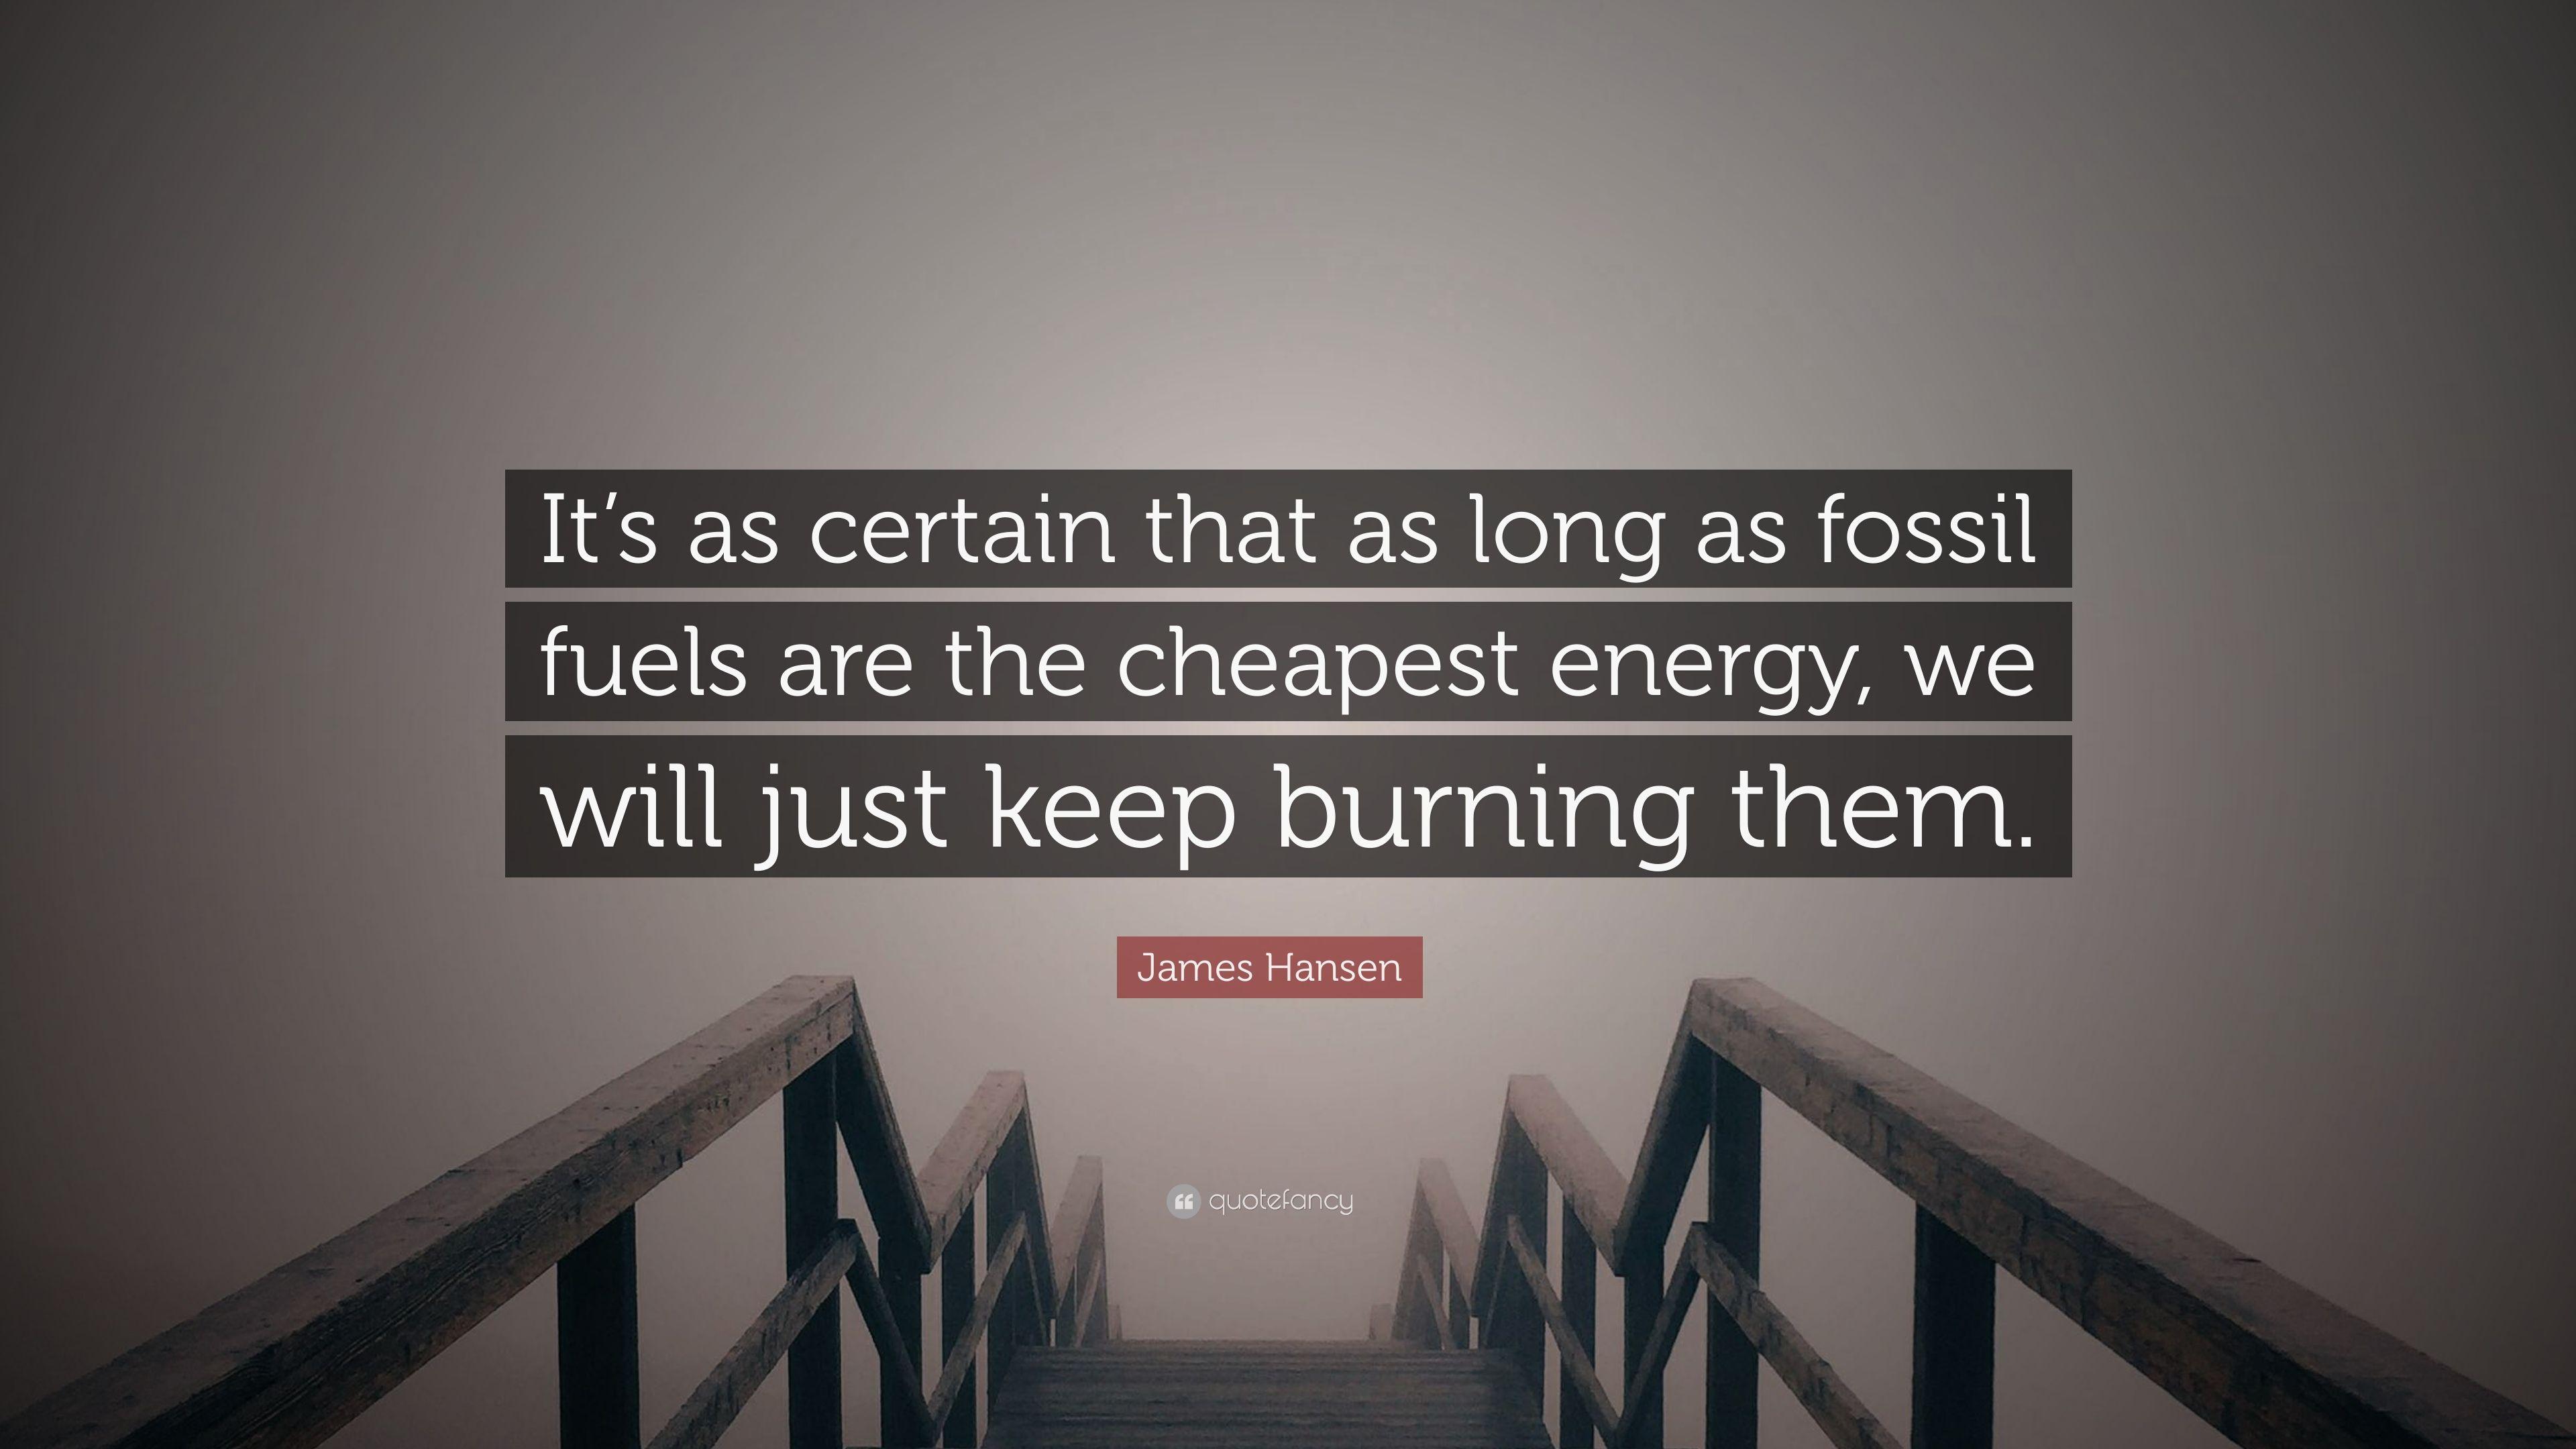 James Hansen Quote: “It's as certain that as long as fossil fuels